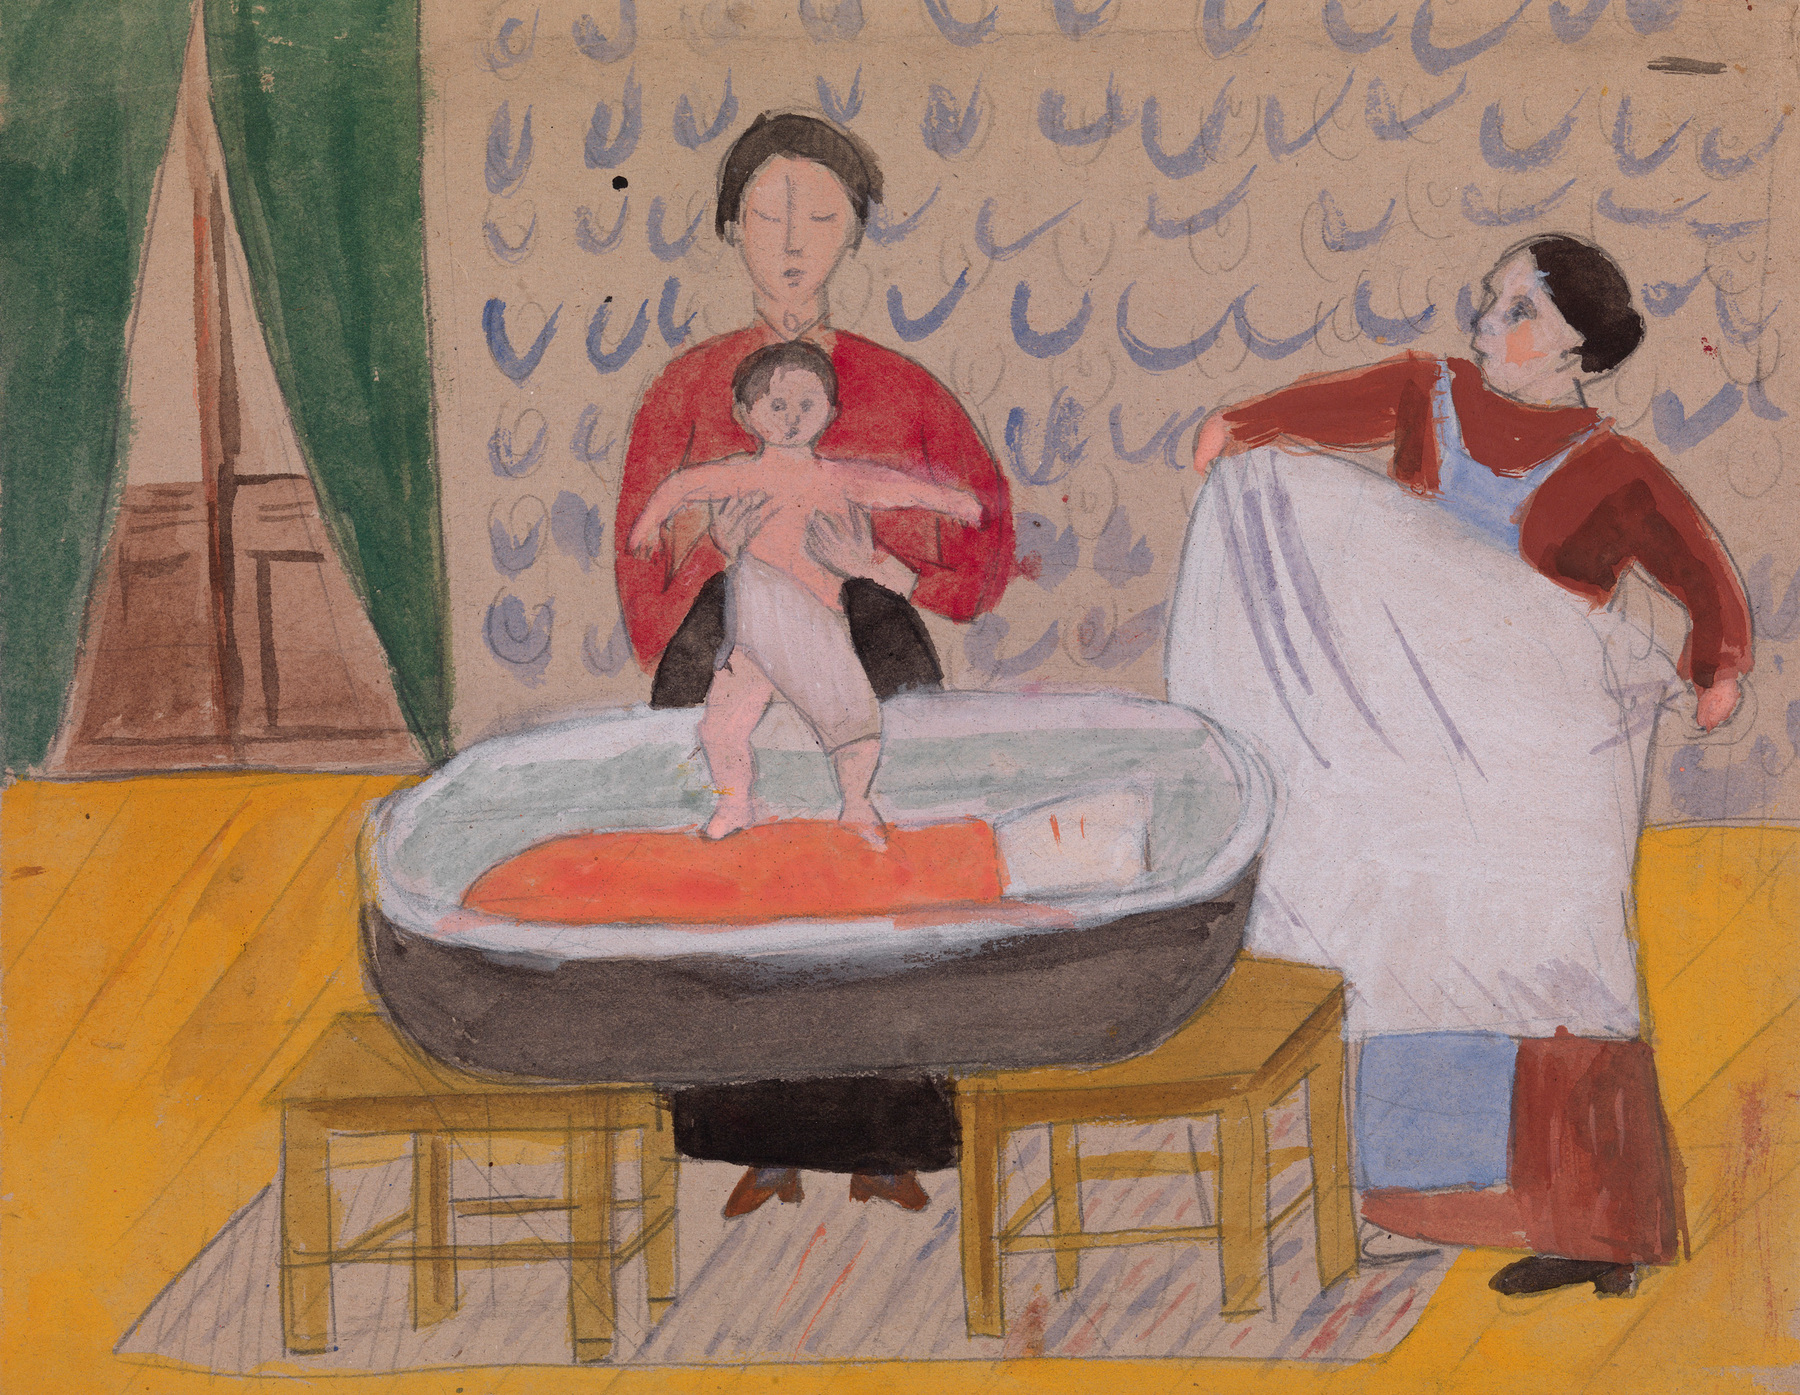 Bathing a Child and At a Dressmaker, two works